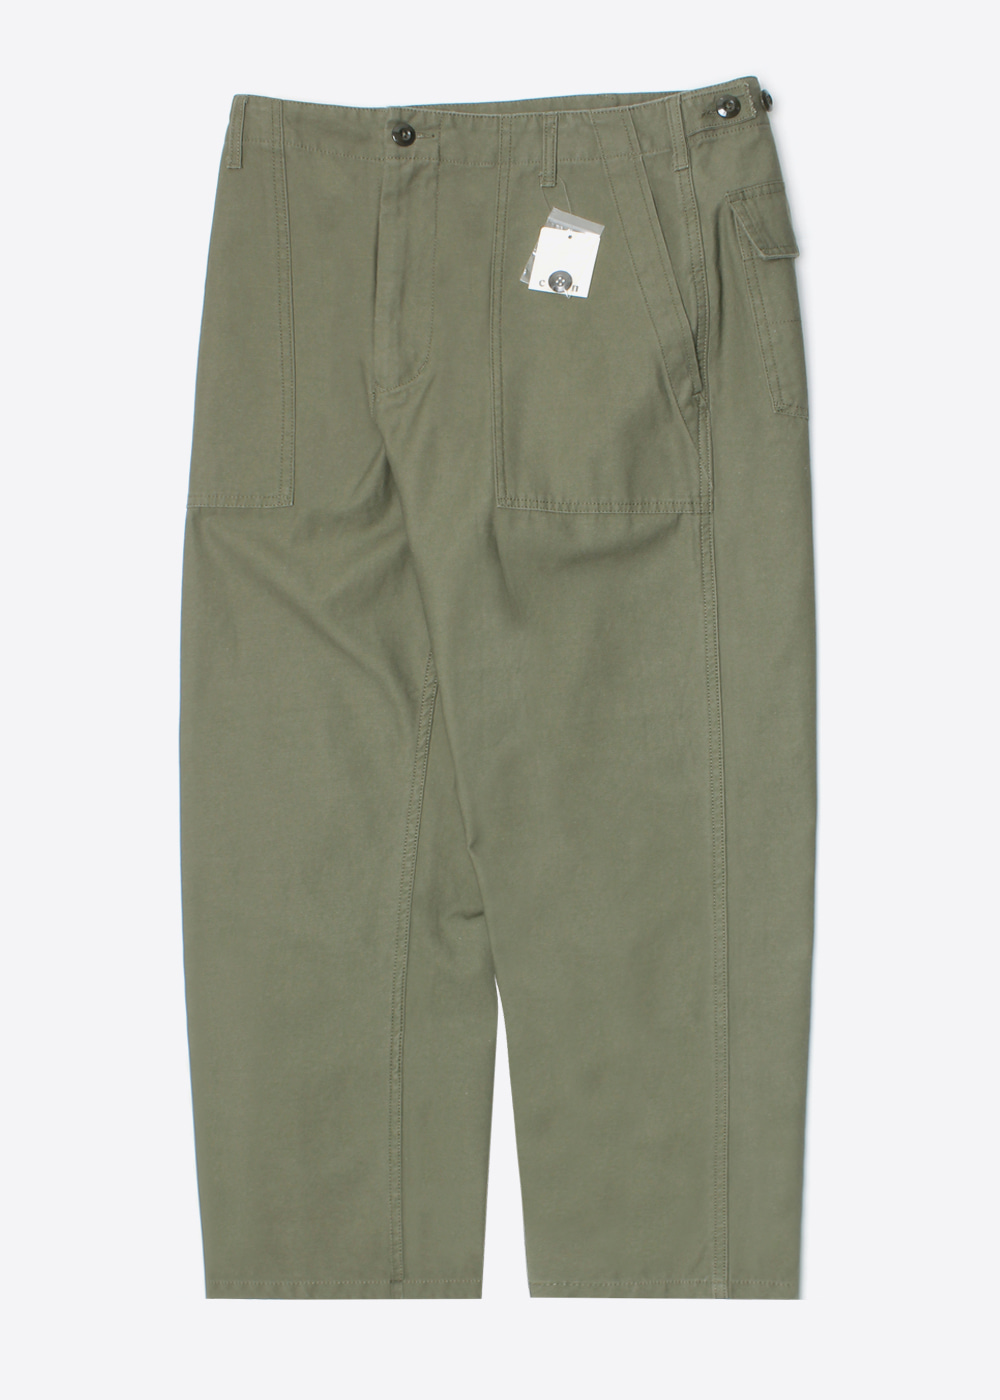 COEN BY UNITED ARROWS’straight fit’fatigue pant